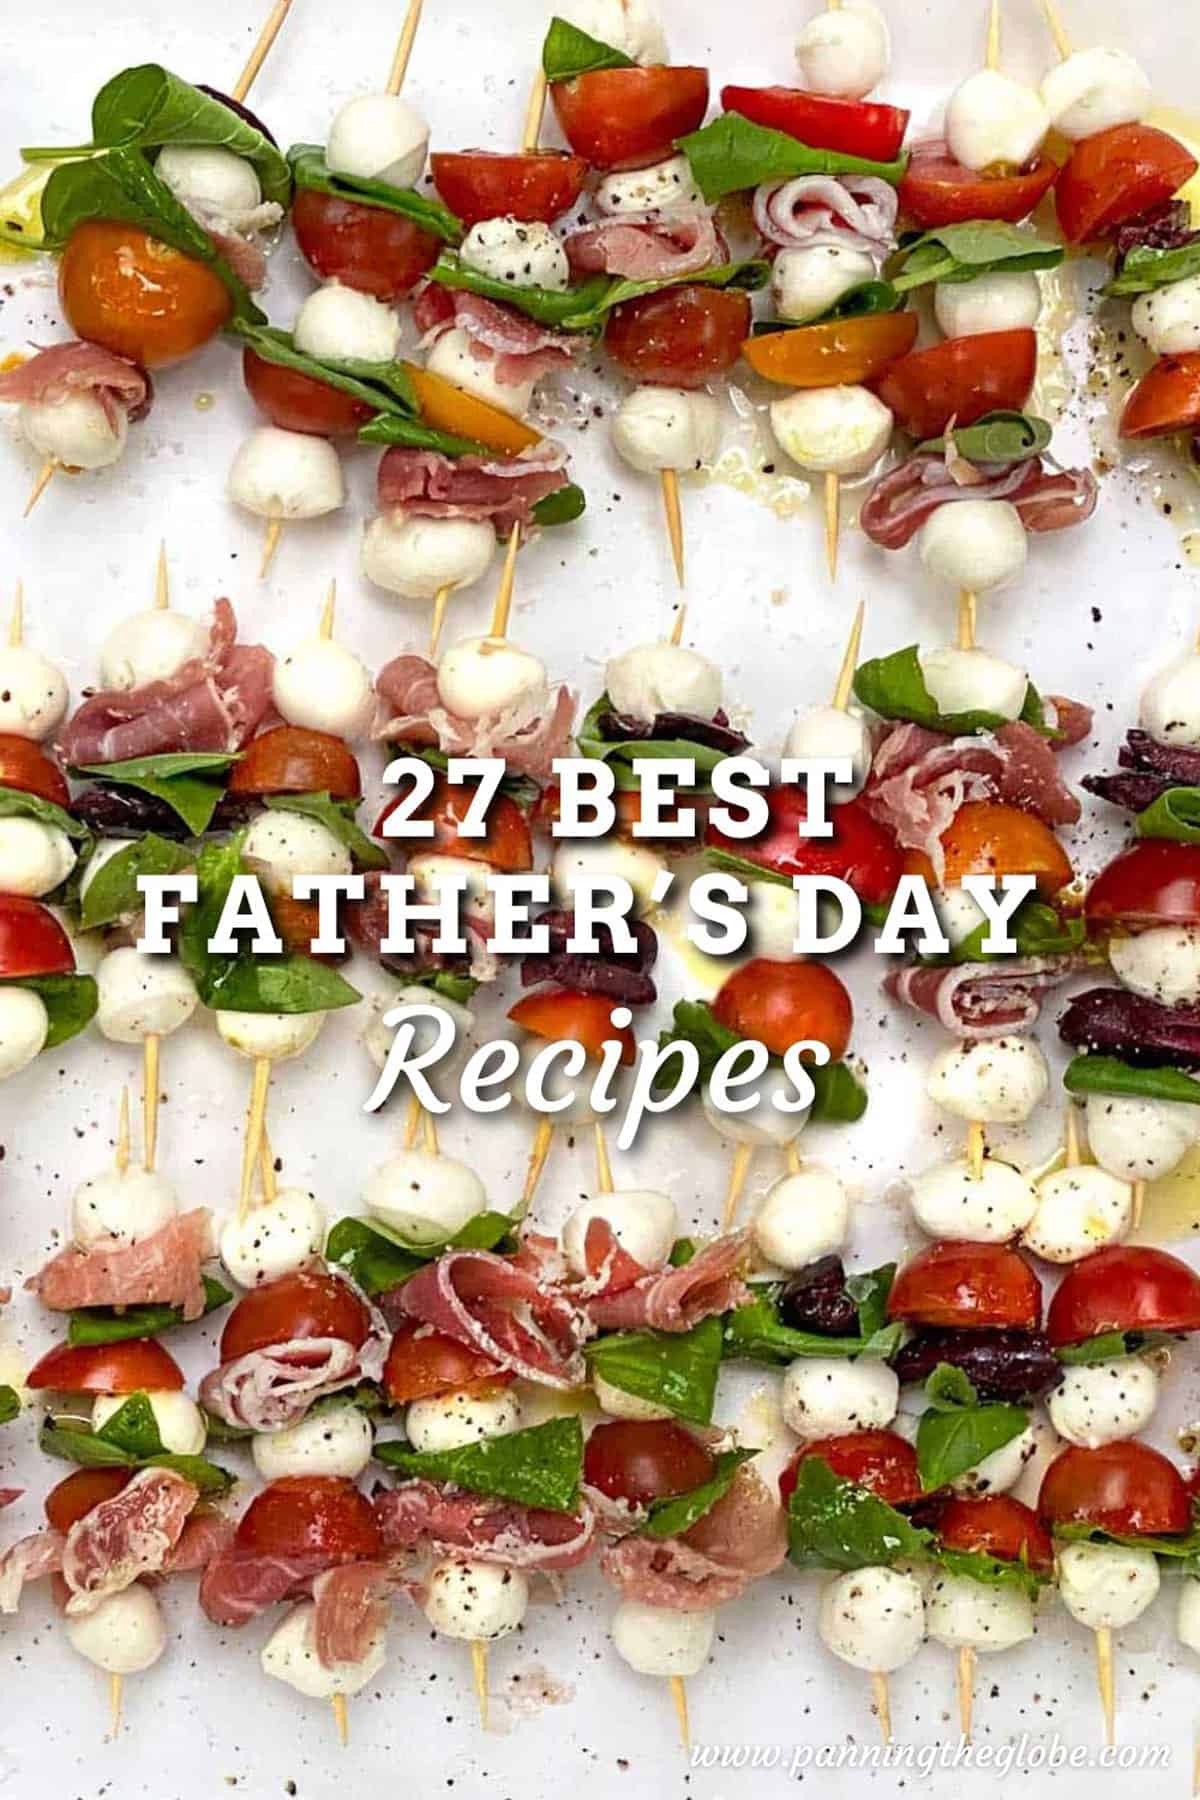 27 Favorite Father's Day Recipes